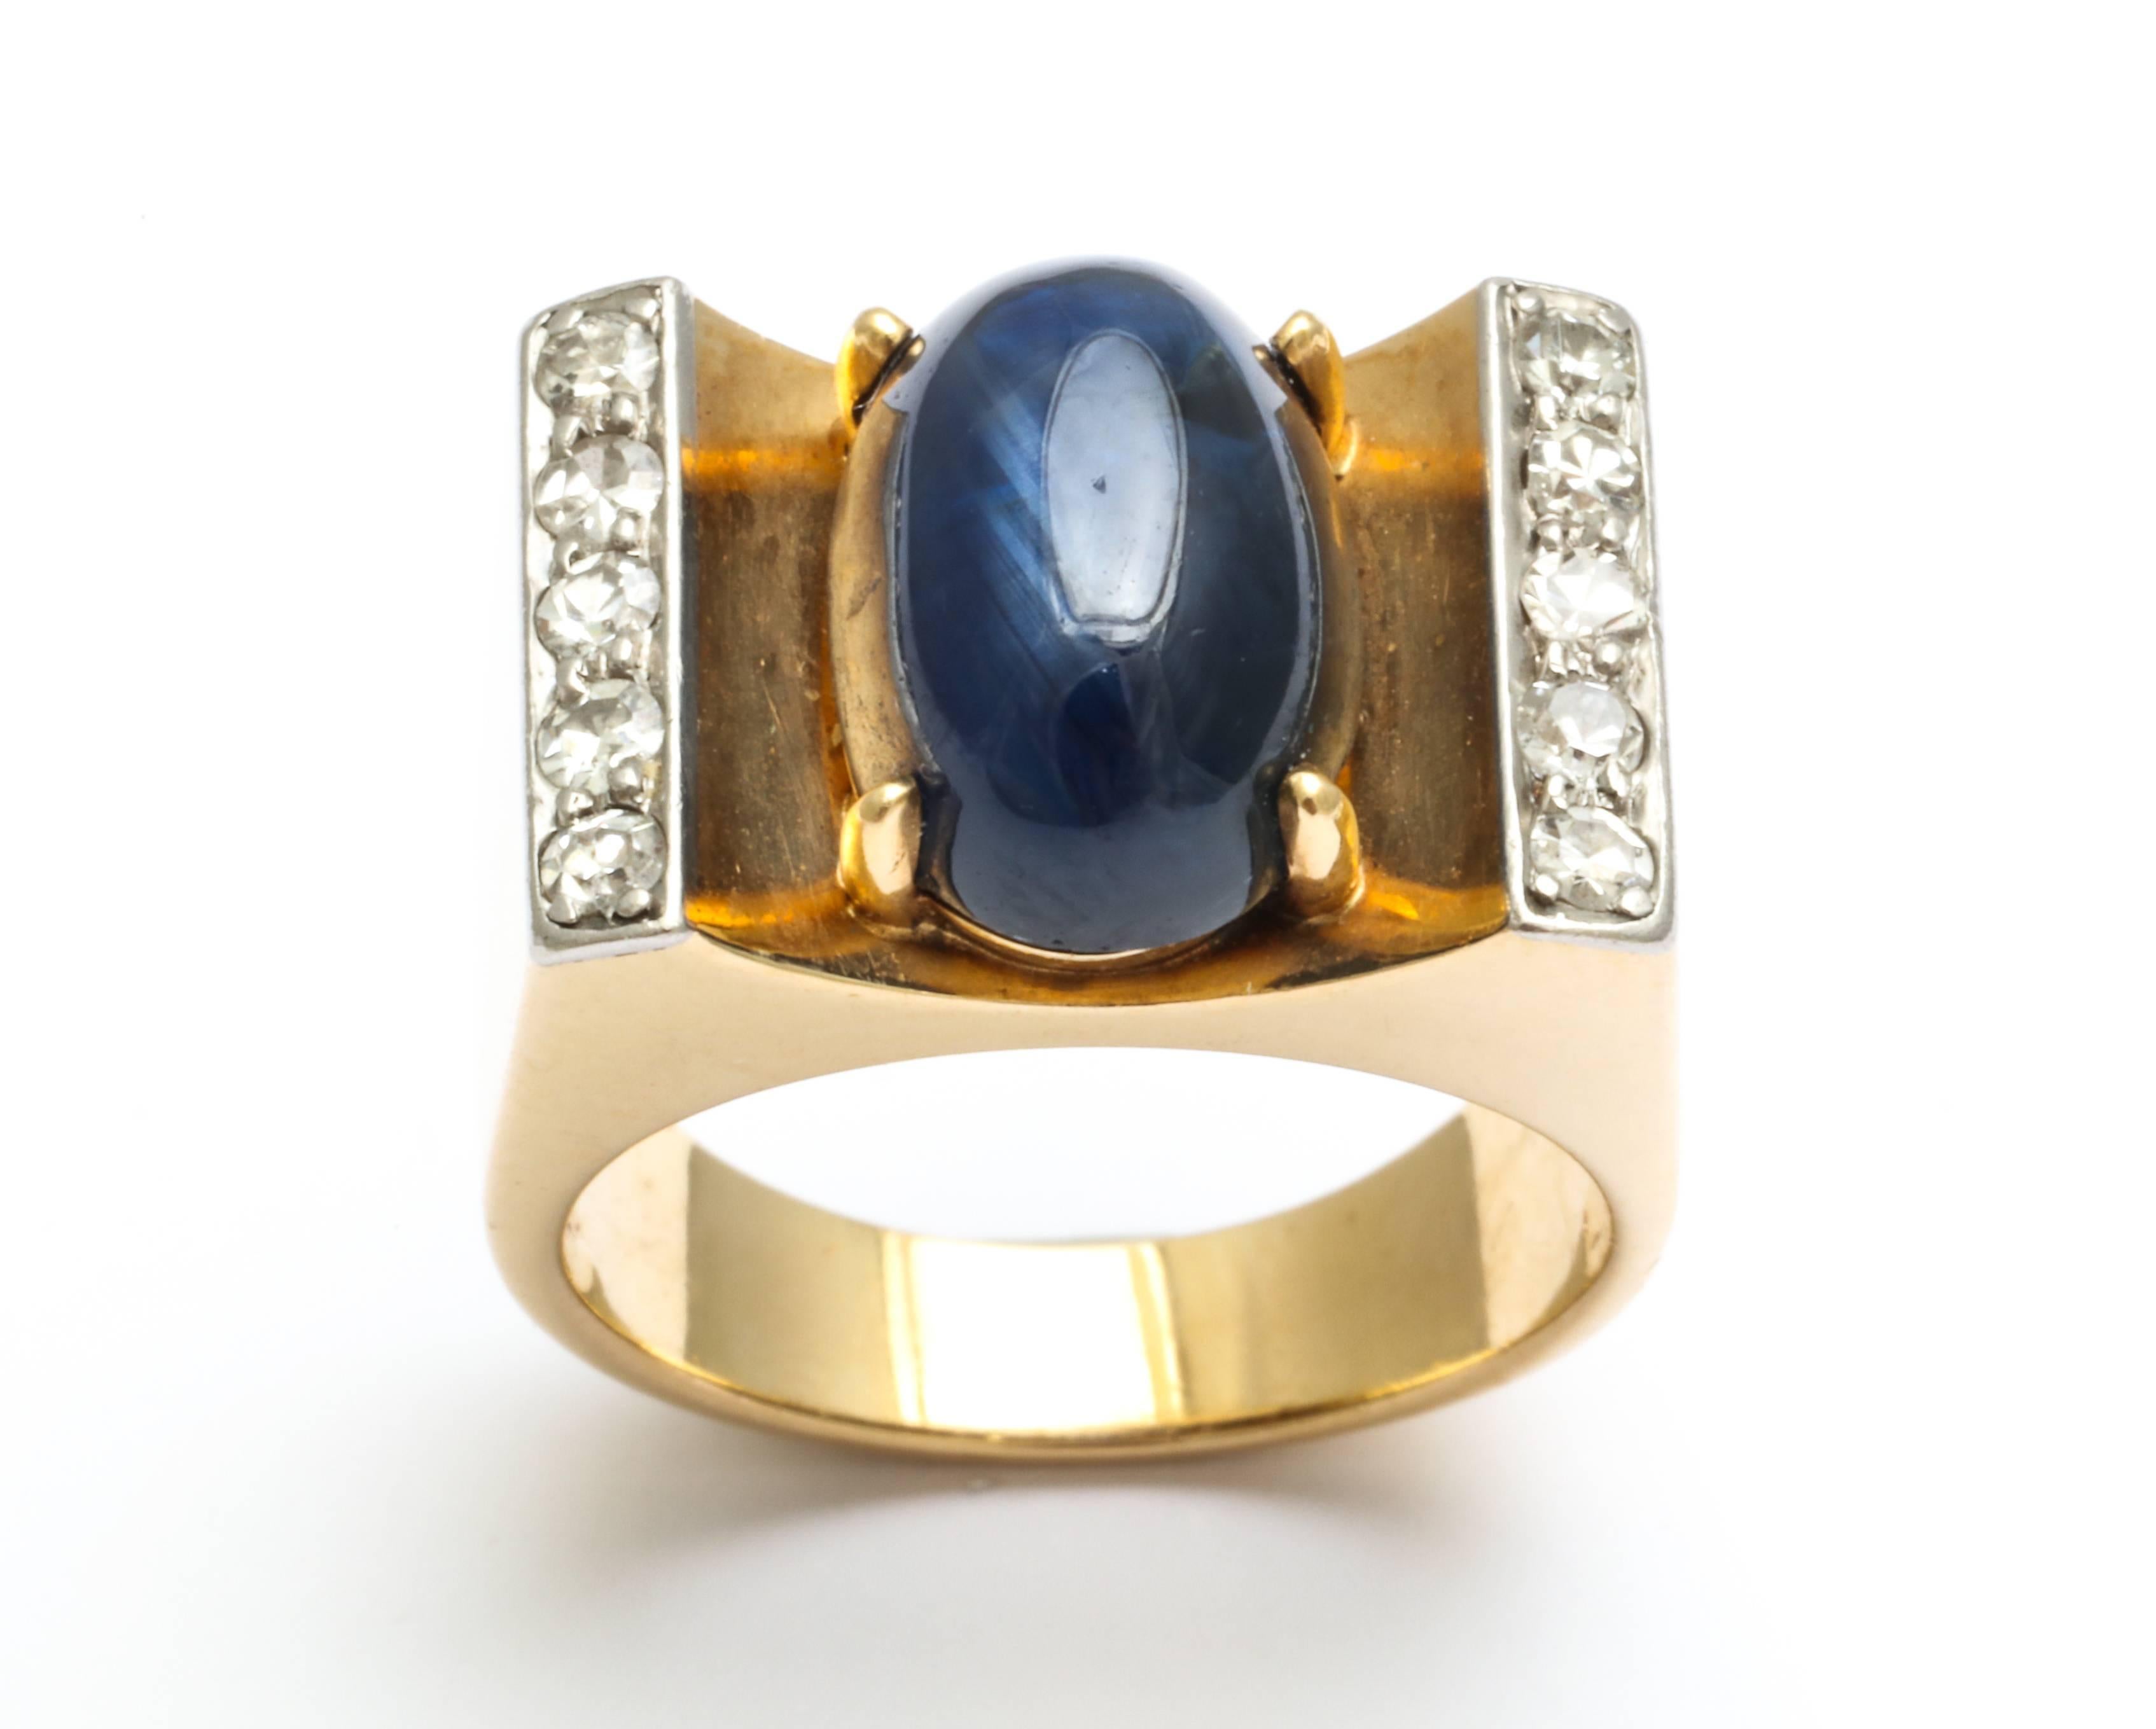 A stunning Art Deco ring with a natural cabochon sapphire flanked by two rows of five diamonds set in 18-karat gold. This ring is signed Traubert Hoefer Mauboussin.